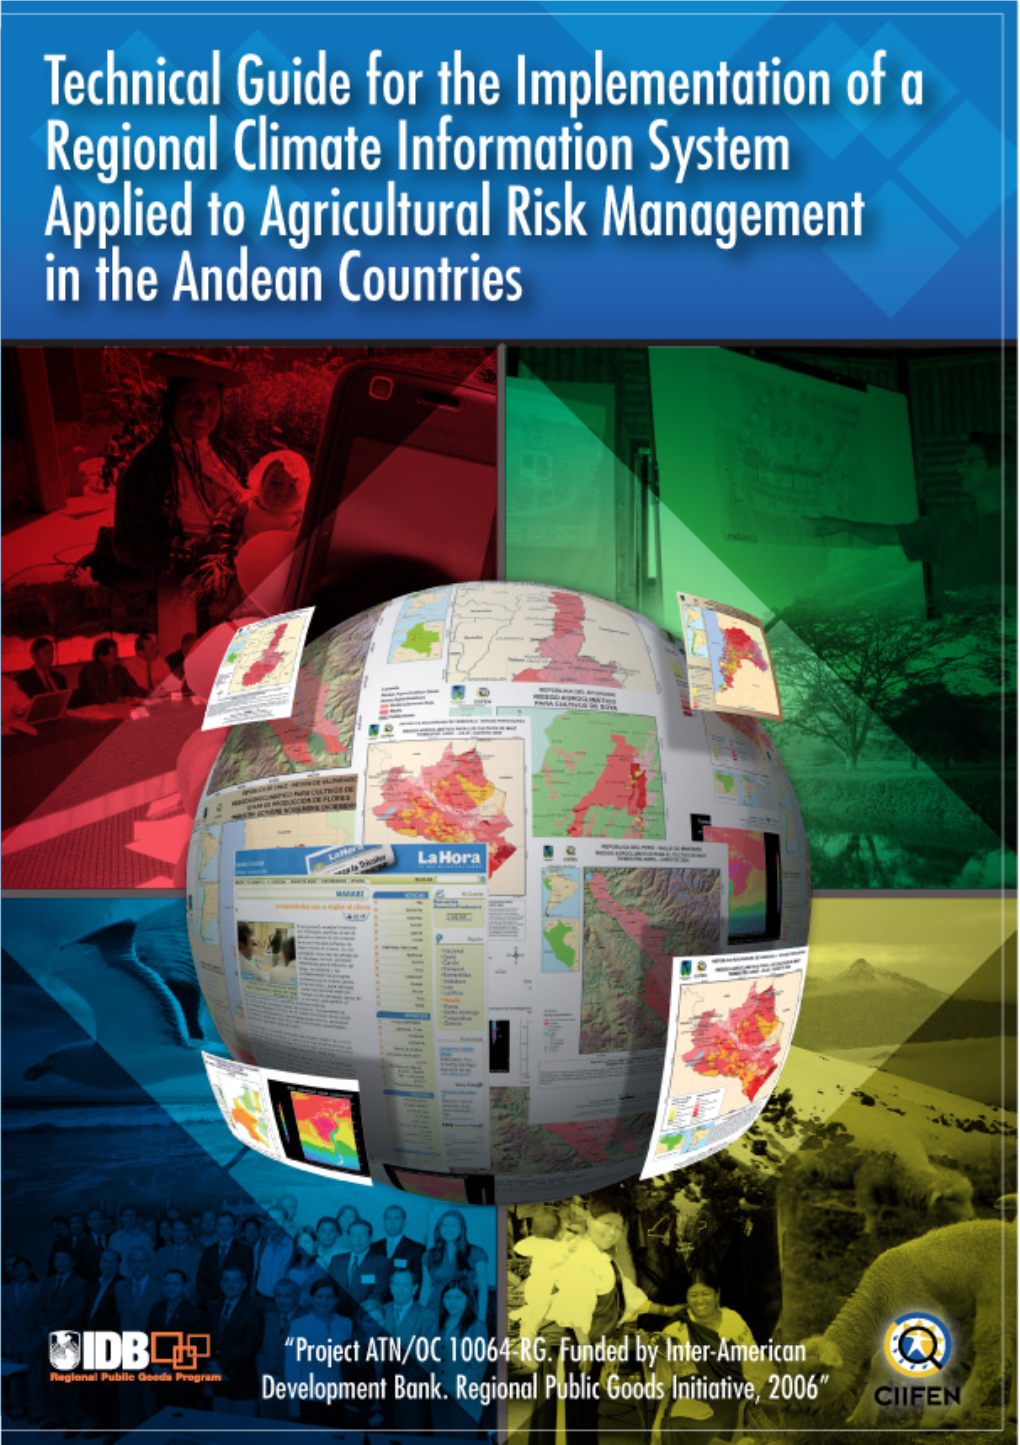 Technical Guide for the Implementation of a Regional Climate Information System Applied to the Agricultural Risk Management in the Andean Countries